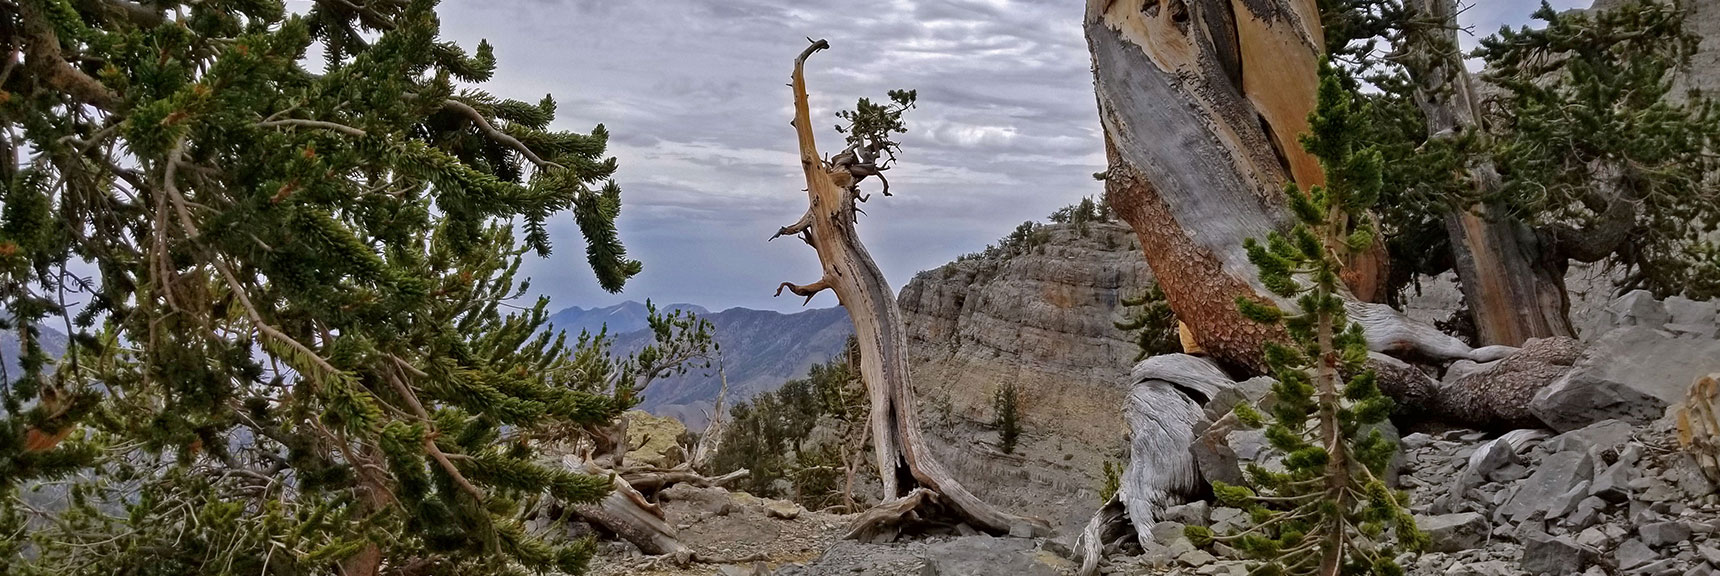 Entering the Zone of the Most Beautiful Ancient Bristlecone Pine Sculptures | Lee and Charleston Peaks via Lee Canyon Mid Ridge | Mt Charleston Wilderness | Spring Mountains, Nevada